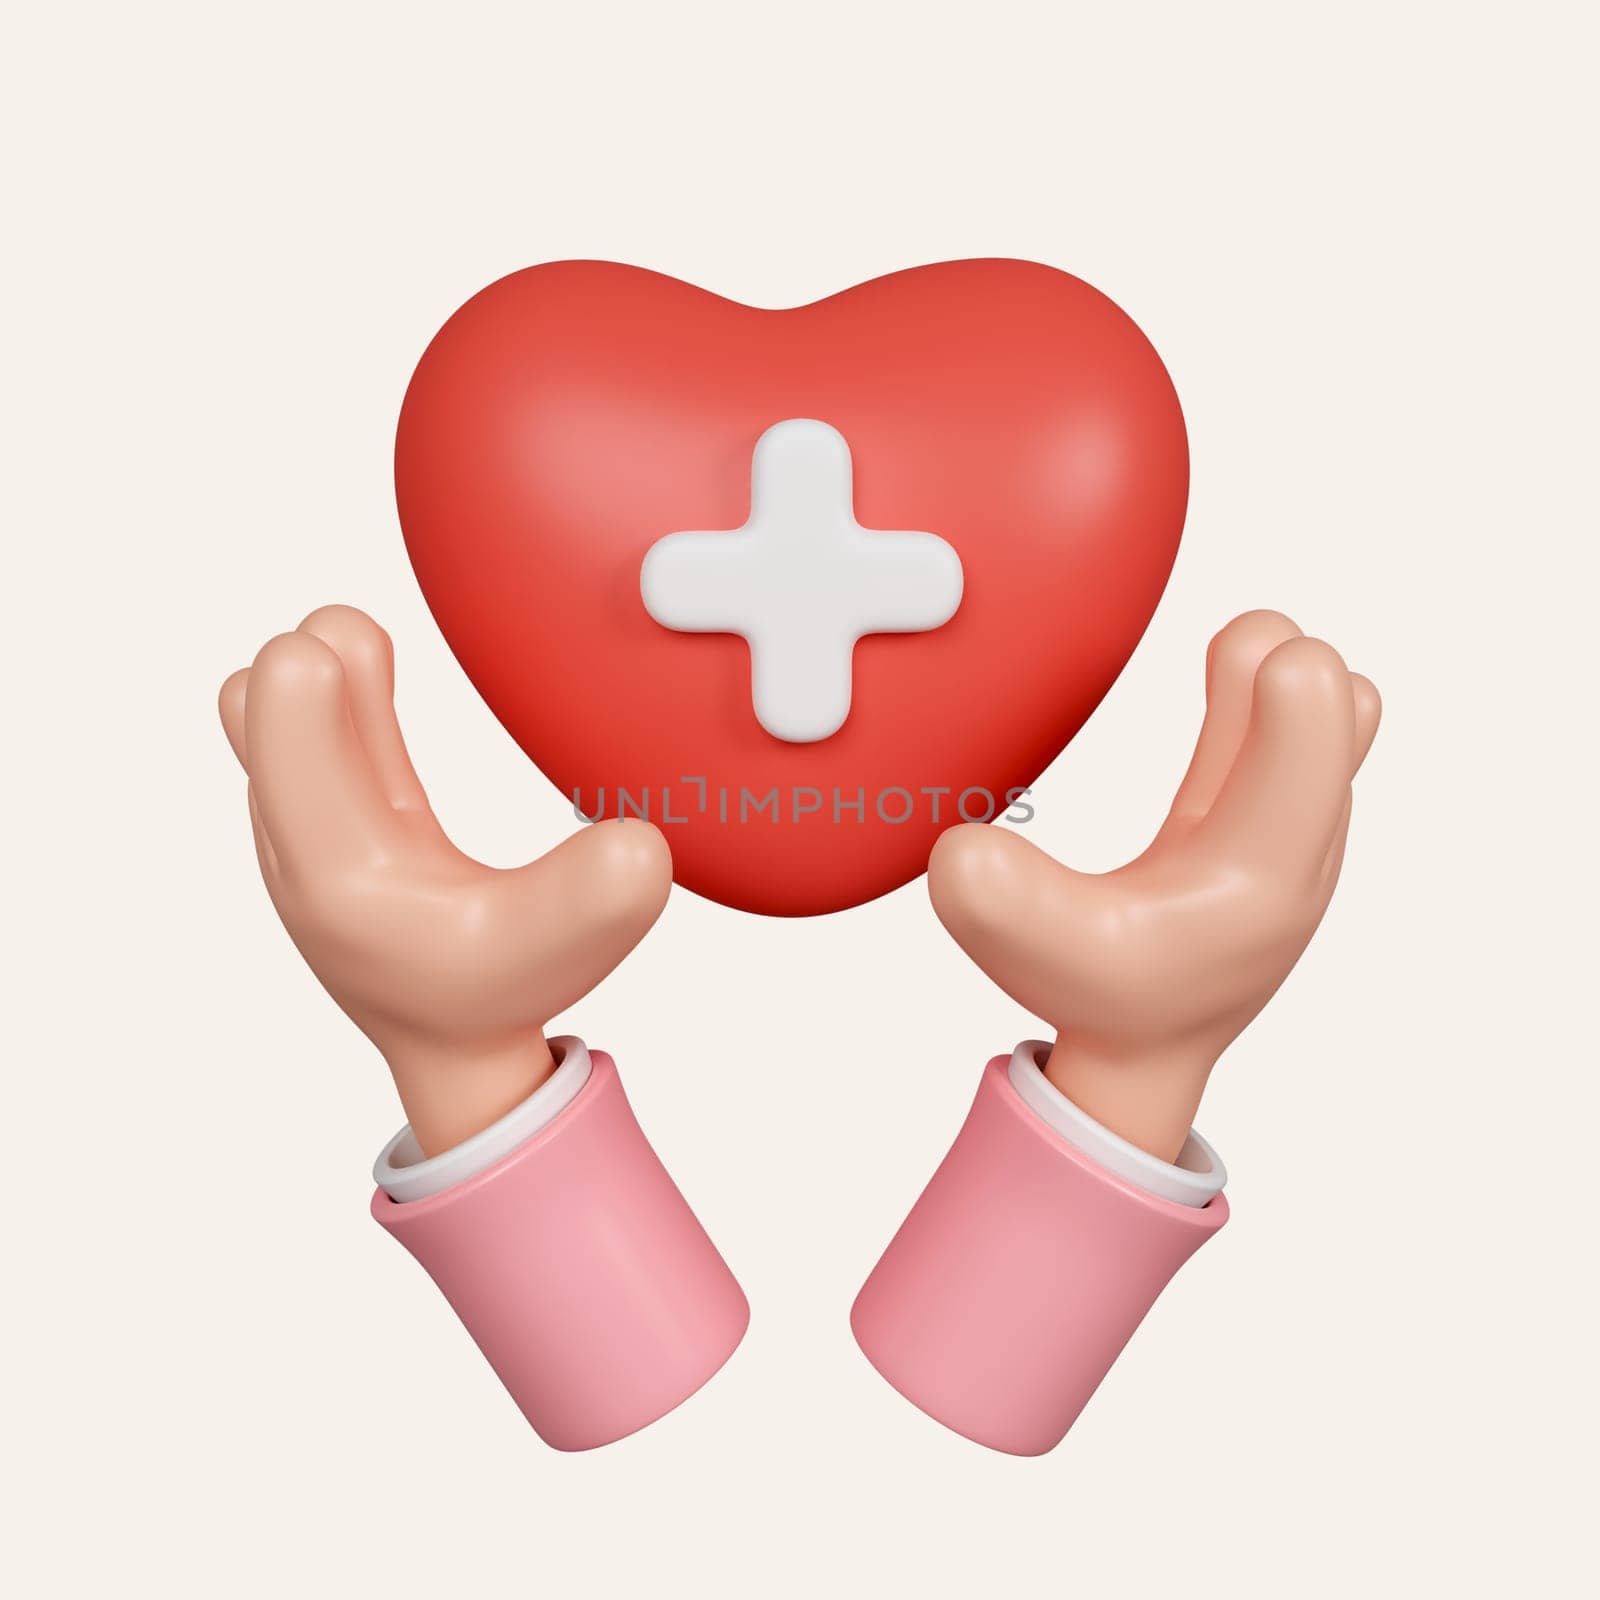 3d hand hold heart with plus sign. heartbeat or cardiogram for healthy lifestyle, pulse beat measure, cardiac assistance. icon isolated on white background. 3d rendering illustration. Clipping path. by meepiangraphic